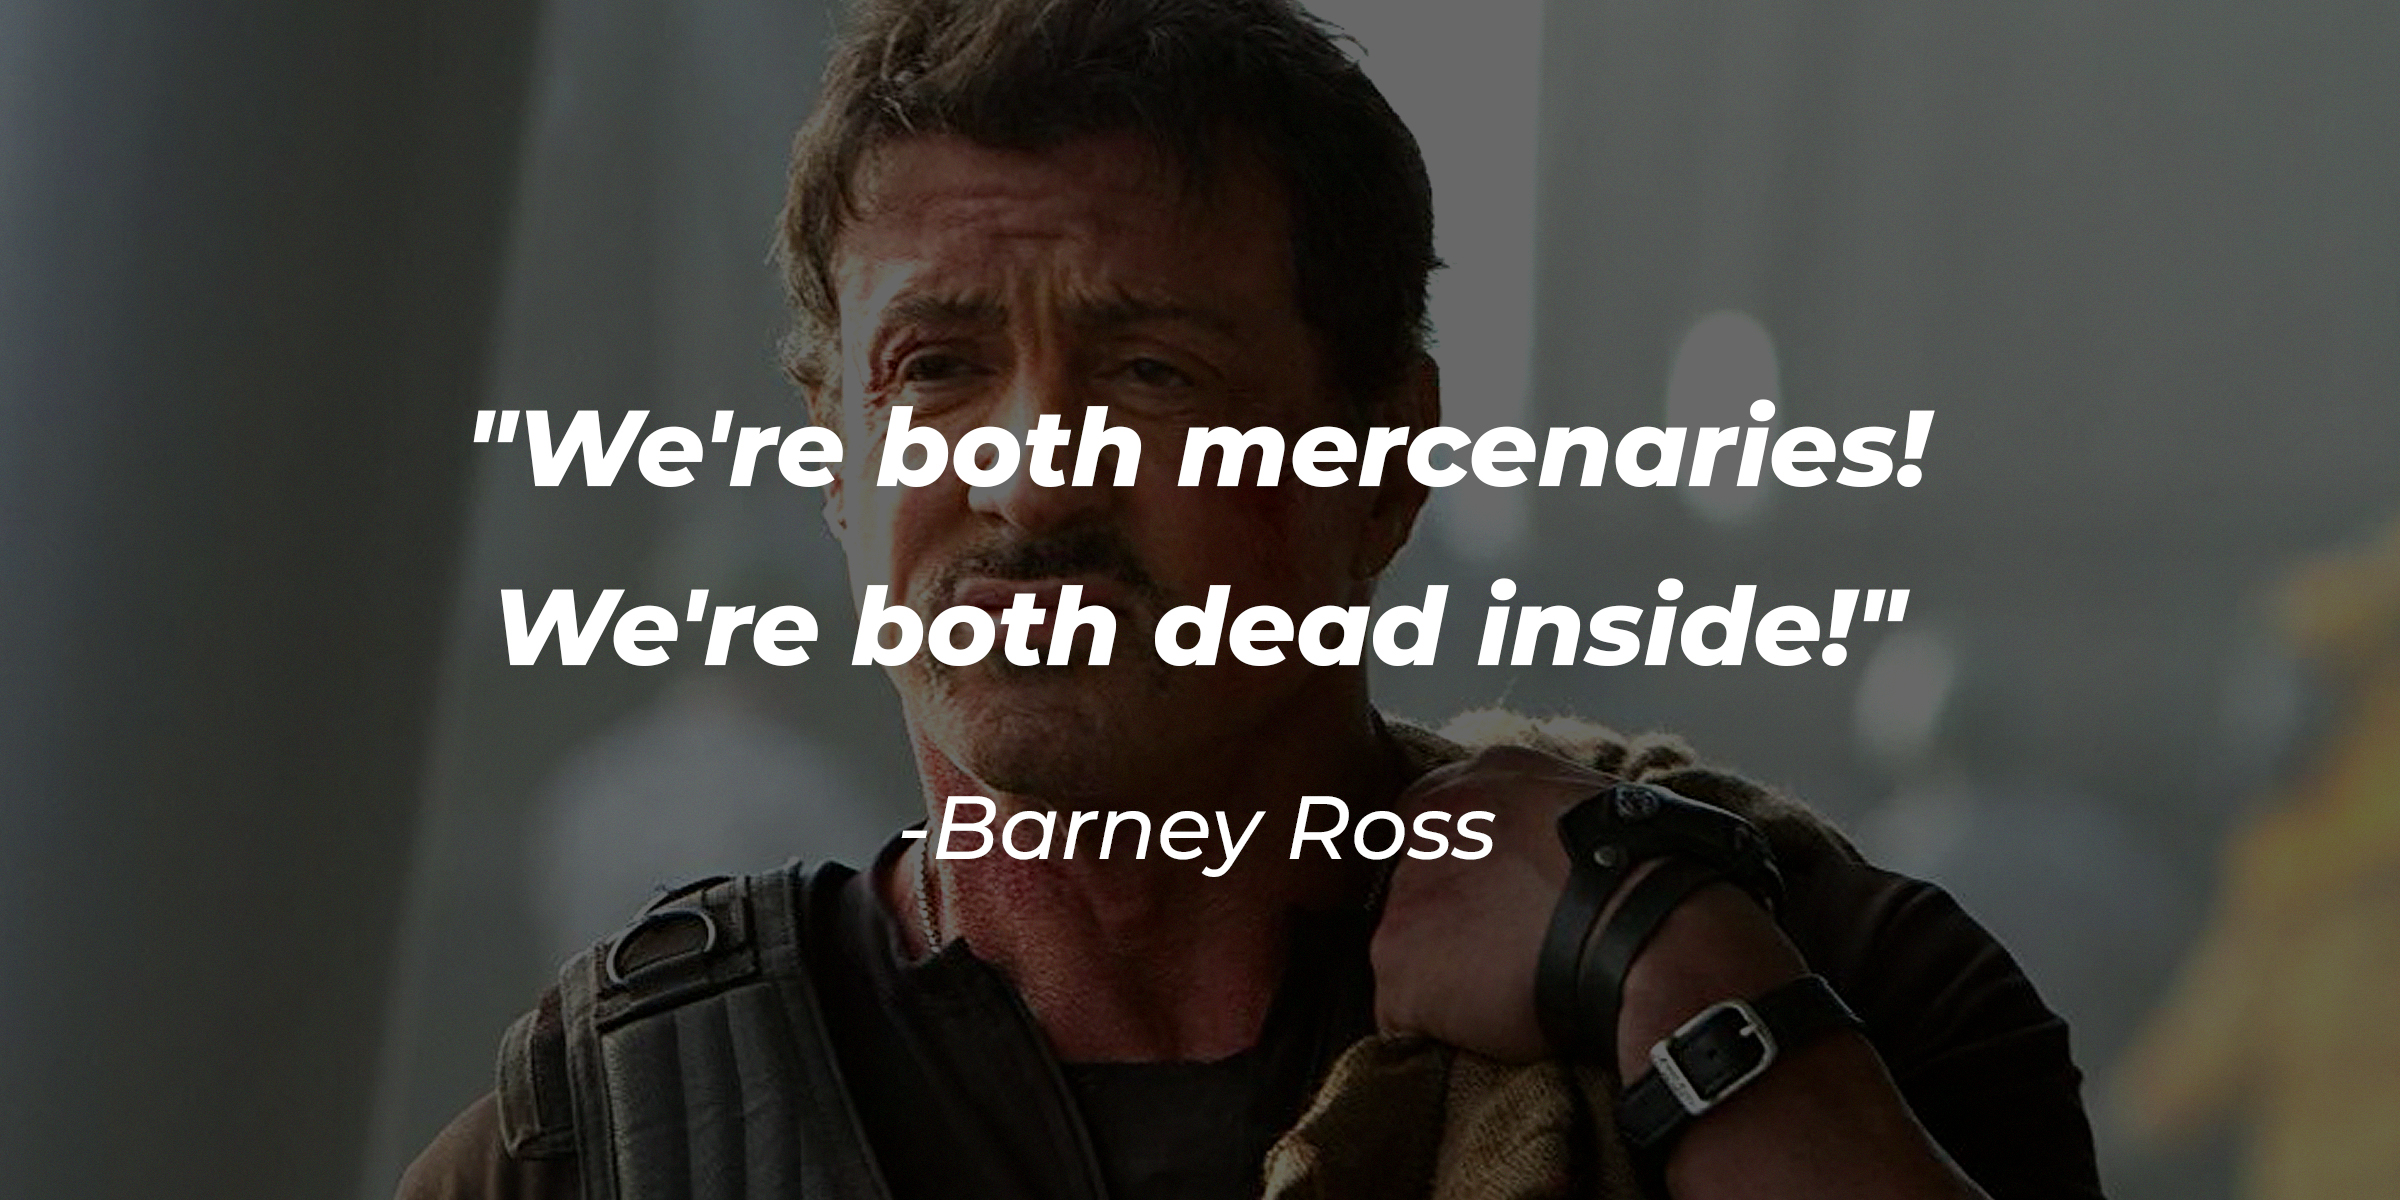 Barney Ross, with his quote: "We're both mercenaries! We're both dead inside!" | Source: Facebook.com/TheExpendablesMovie